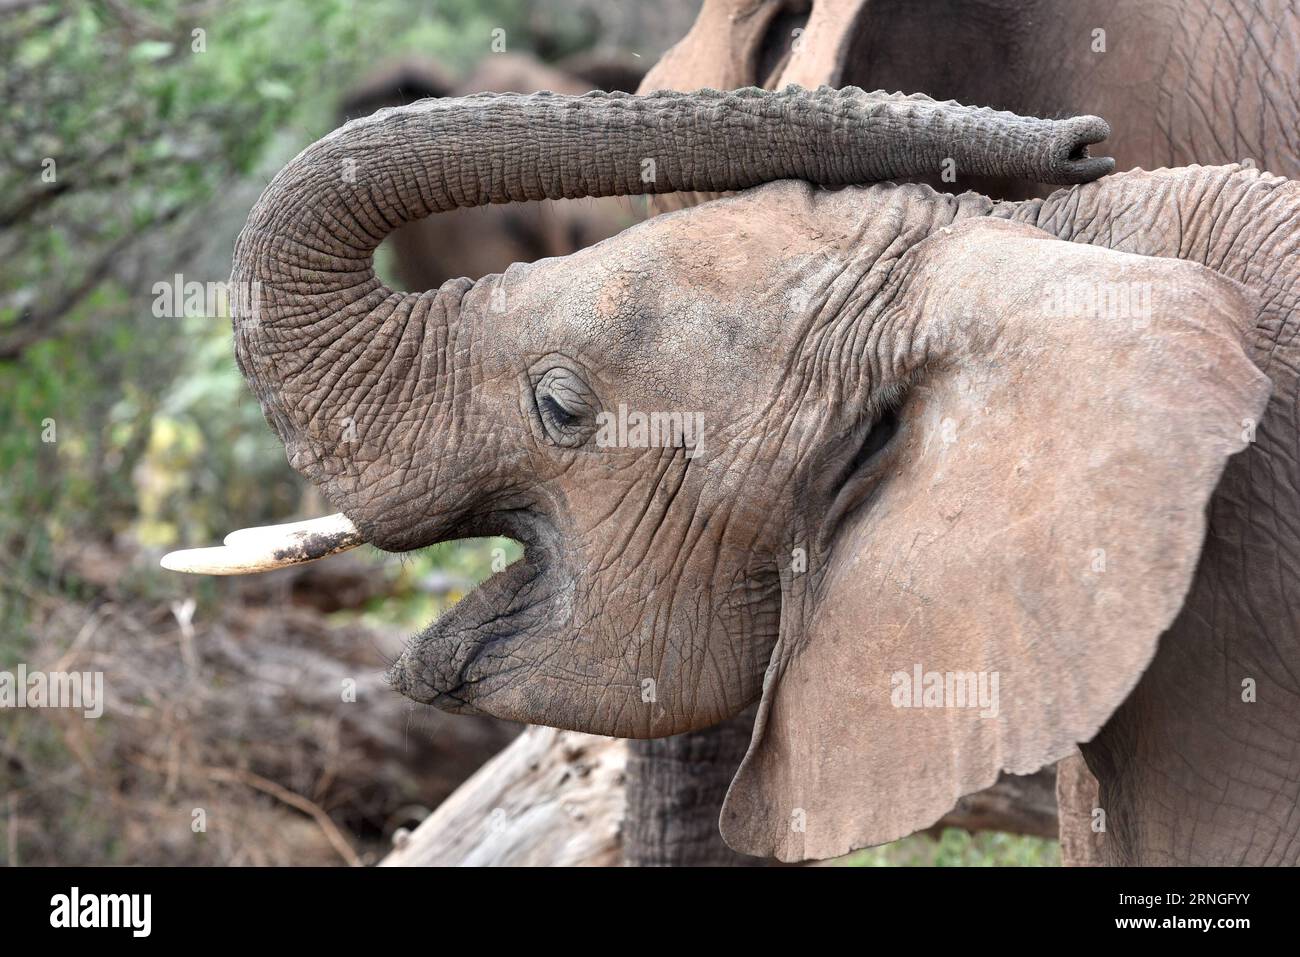 (160927) -- SAMBURU, Sept. 27, 2016 -- This file photo taken on Feb. 29, 2016 shows an elephant at Samburu National Reserve, Kenya. Africa s overall elephant population has seen the worst declines in 25 years, mainly due to poaching over the past 10 years, according to the African Elephant Status Report launched by the International Union for Conservation of Nature and Natural Resources (IUCN) at the ongoing 17th meeting of the Conference of the Parties to the Convention on International Trade in Endangered Spices of Wild Fauna and Flora (CITES) in Johannesburg on Sunday. The real decline in t Stock Photo